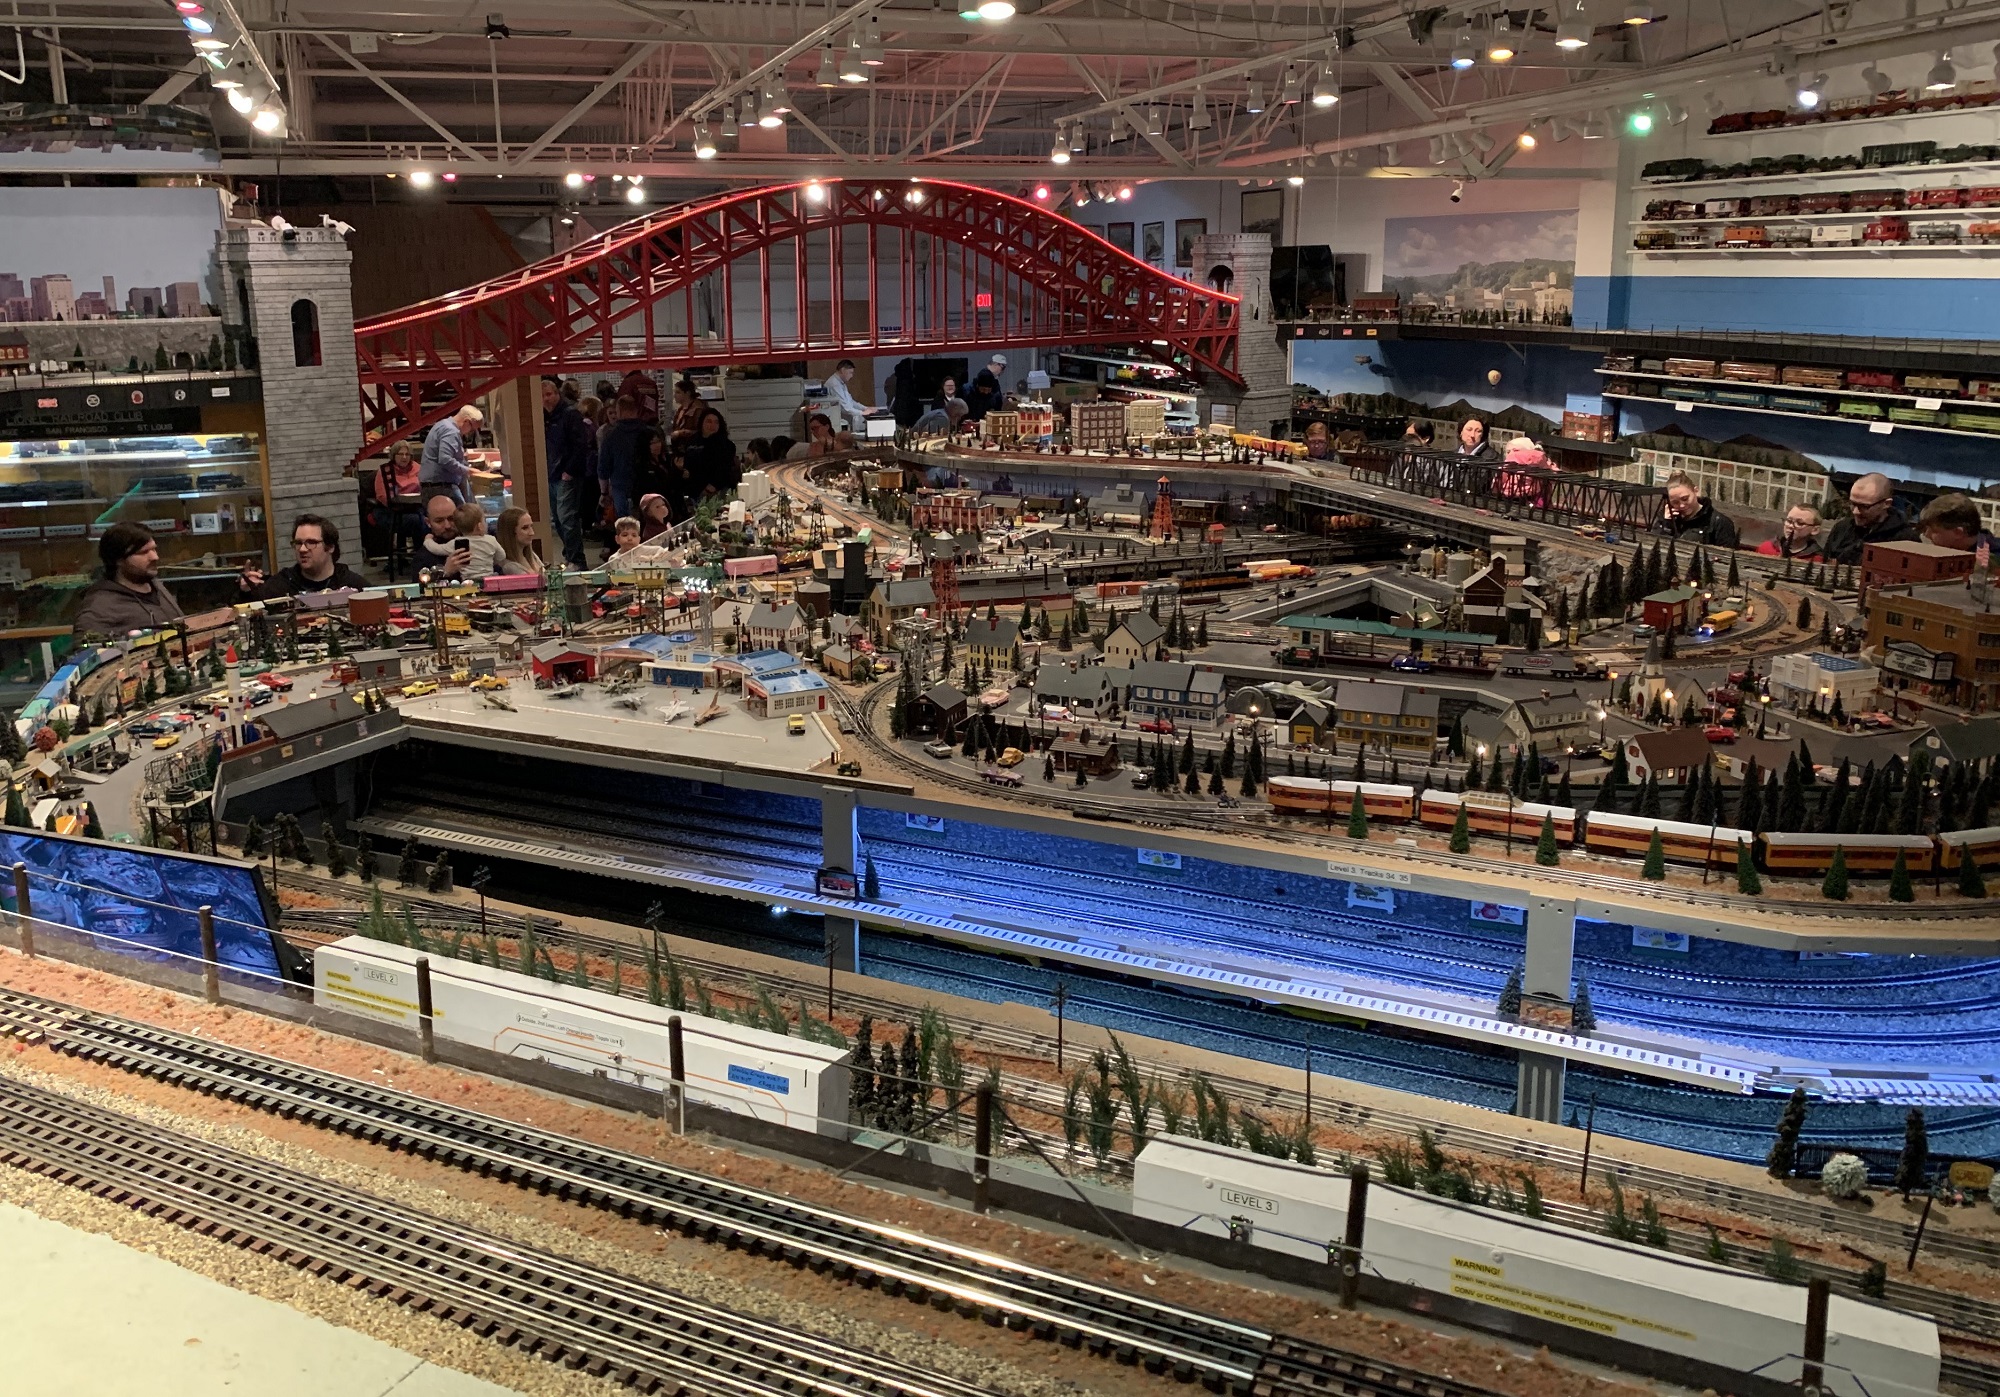 The Lionel Railroad Club operates in a 3000 square foot facility in New Berlin, Wisconsin. (Photo by Jane Hampden)